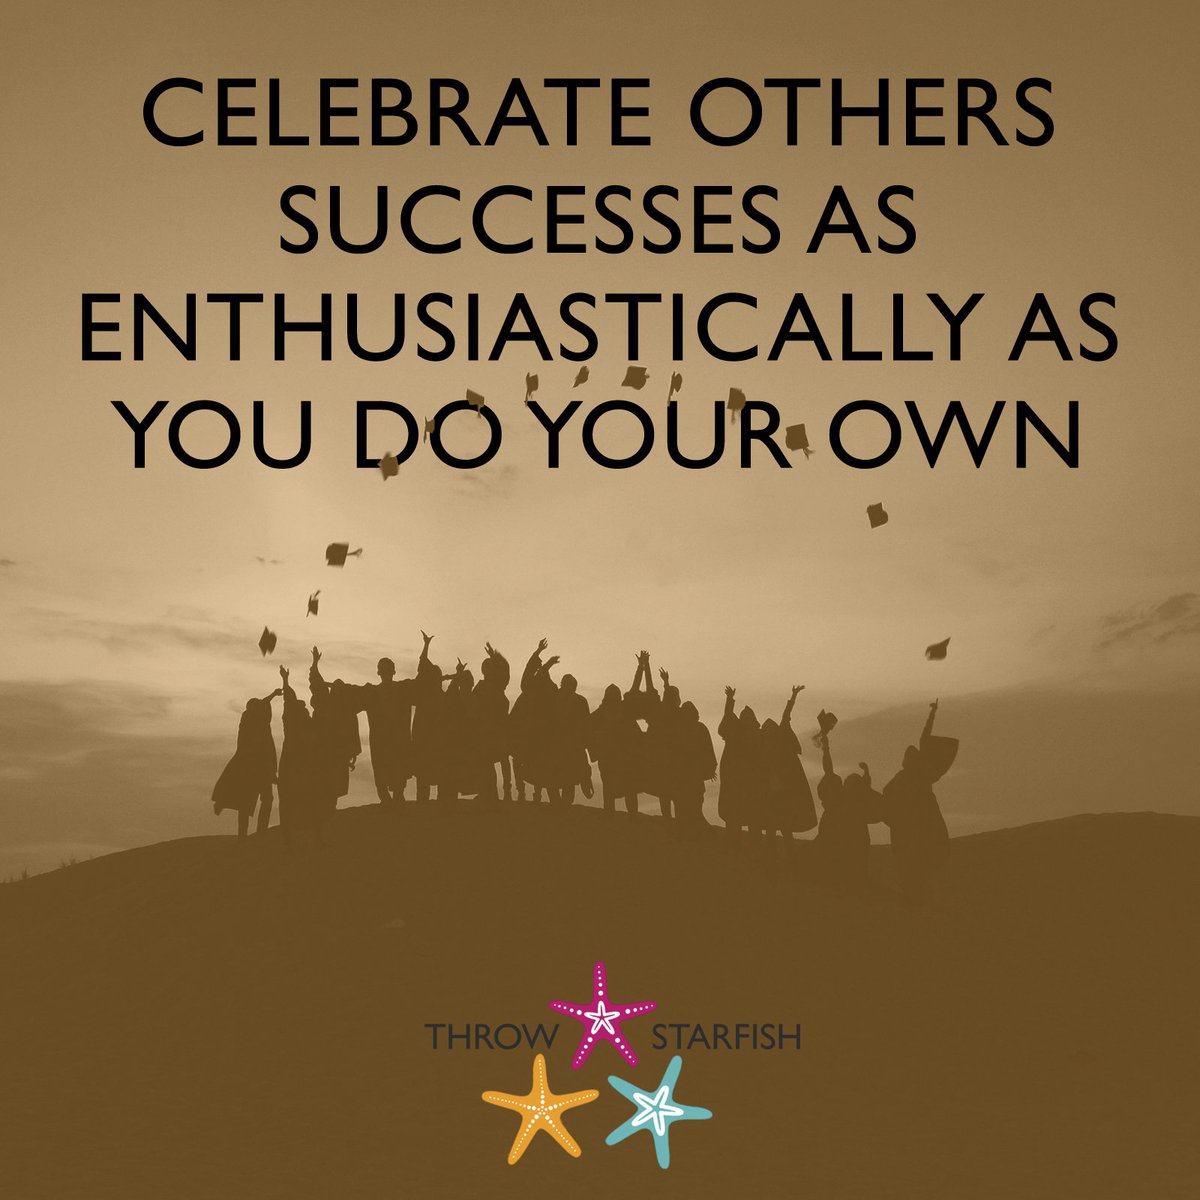 Celebrate others successes as enthusiastically as you do your own.
You can #Listen to episodes of our #Podcast at throwstarfish.com #ThrowStarfish